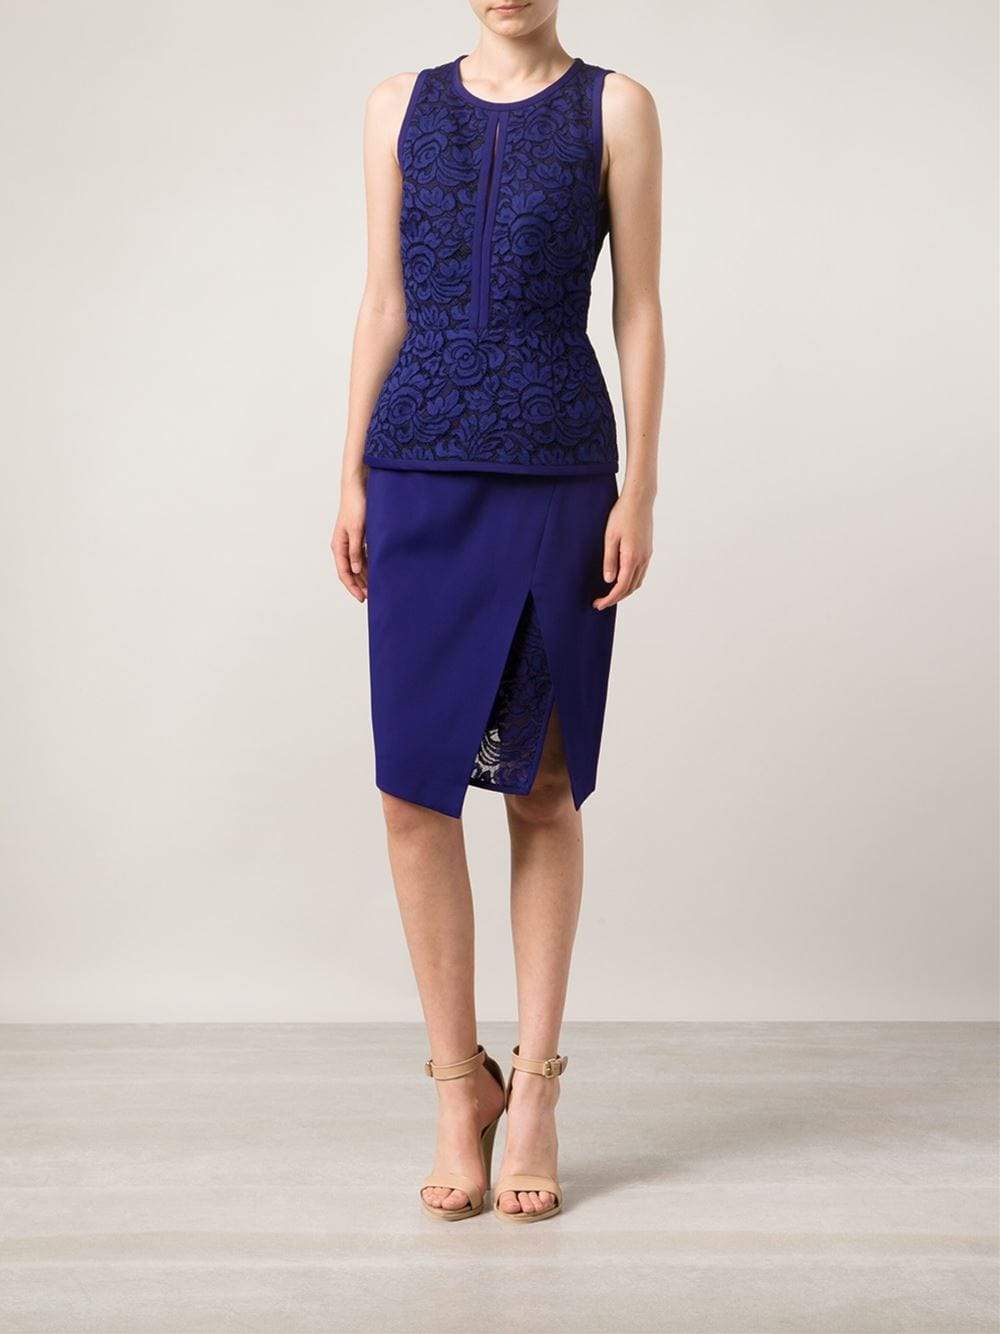 J MENDEL-Halter Top With Lace Embroidery-